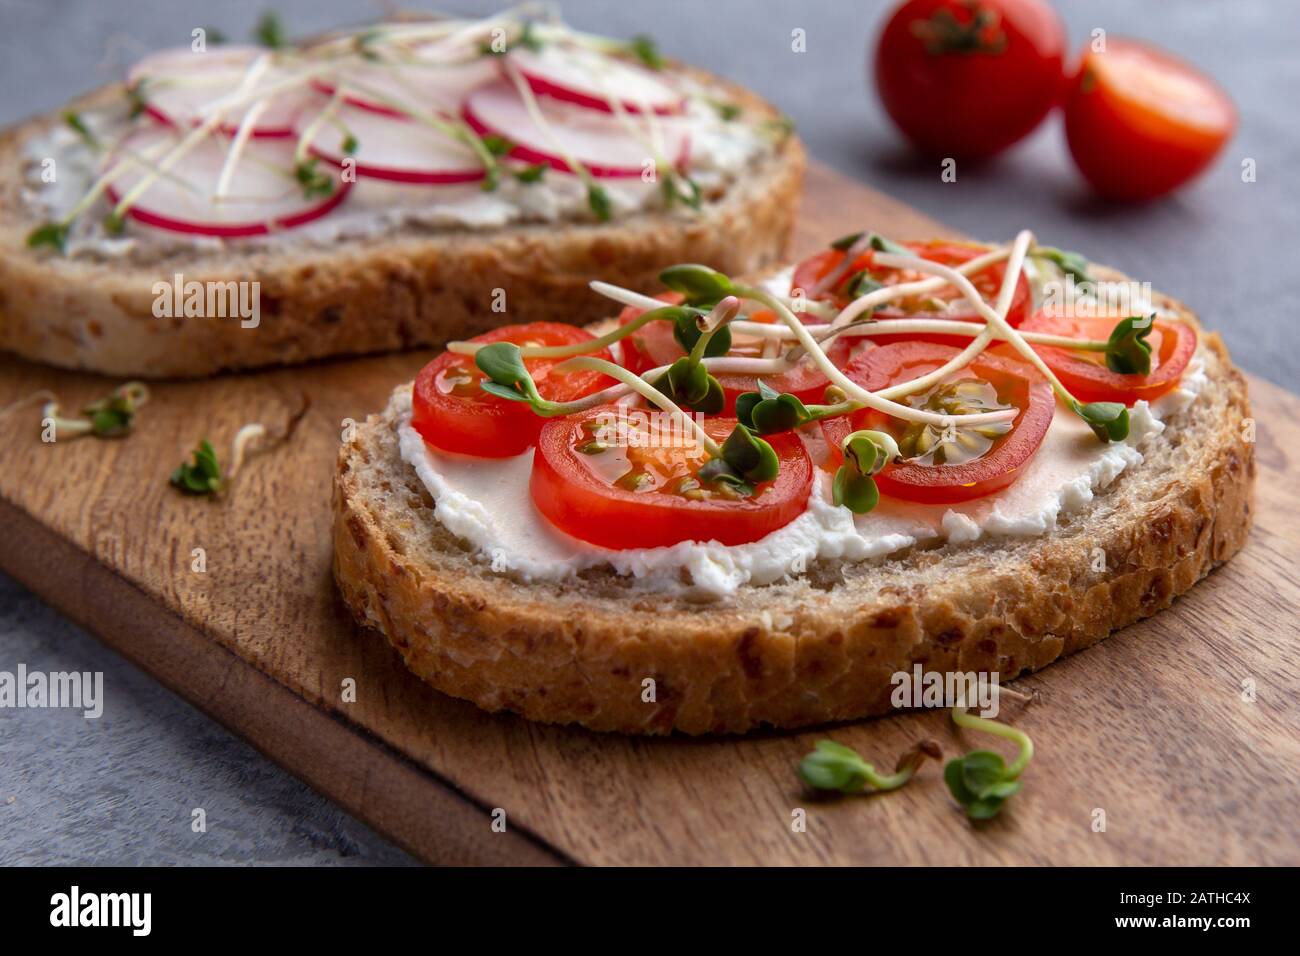 Close-up of a sandwich with tomatoes, microgreens and grain bread on a grey background Stock Photo